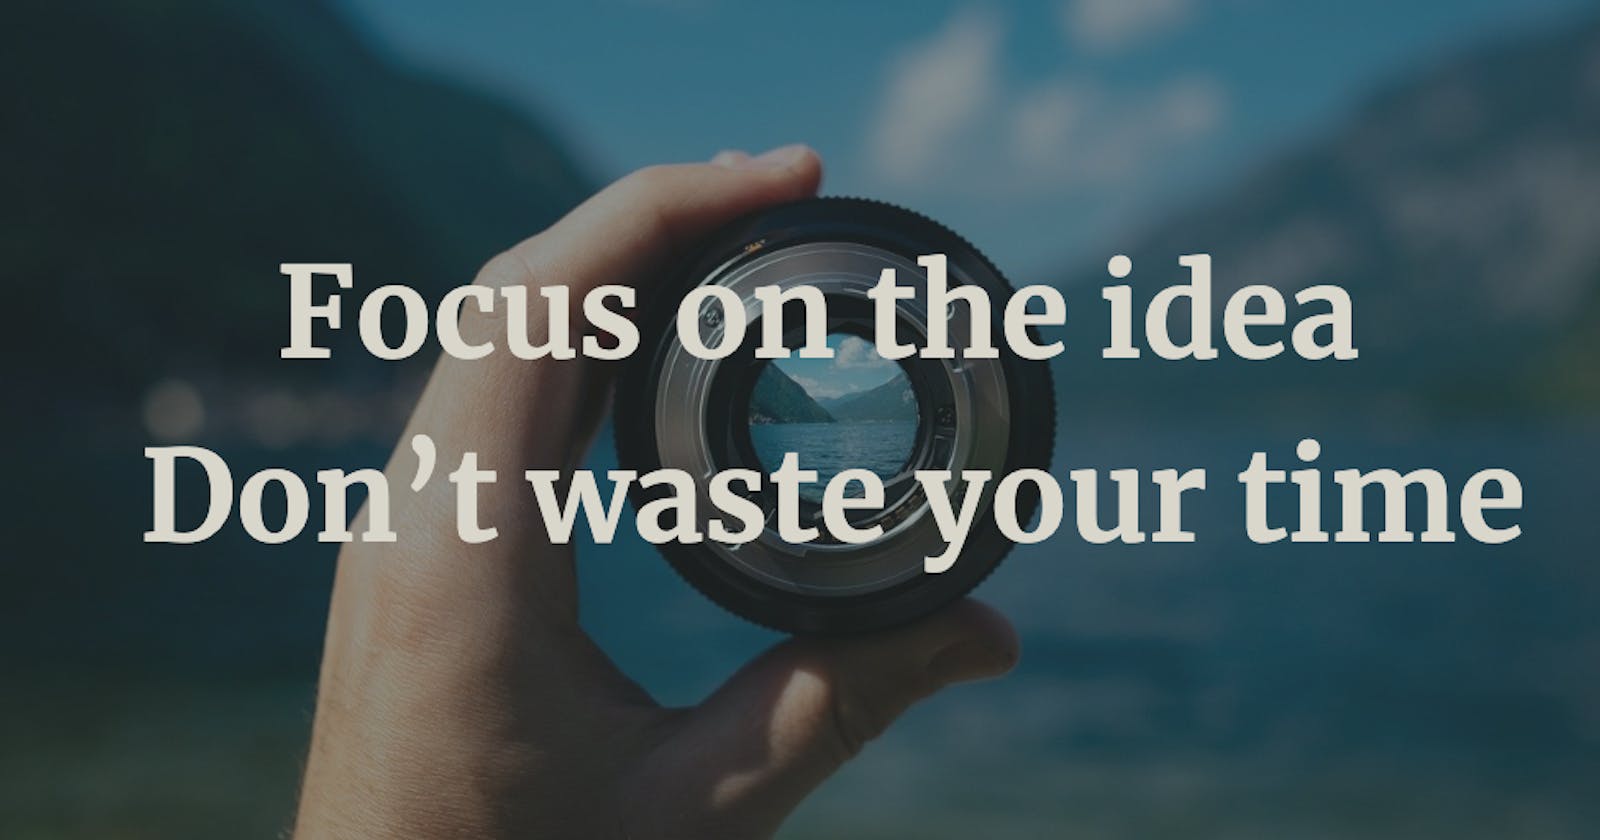 Focus on the idea – Don’t waste your time